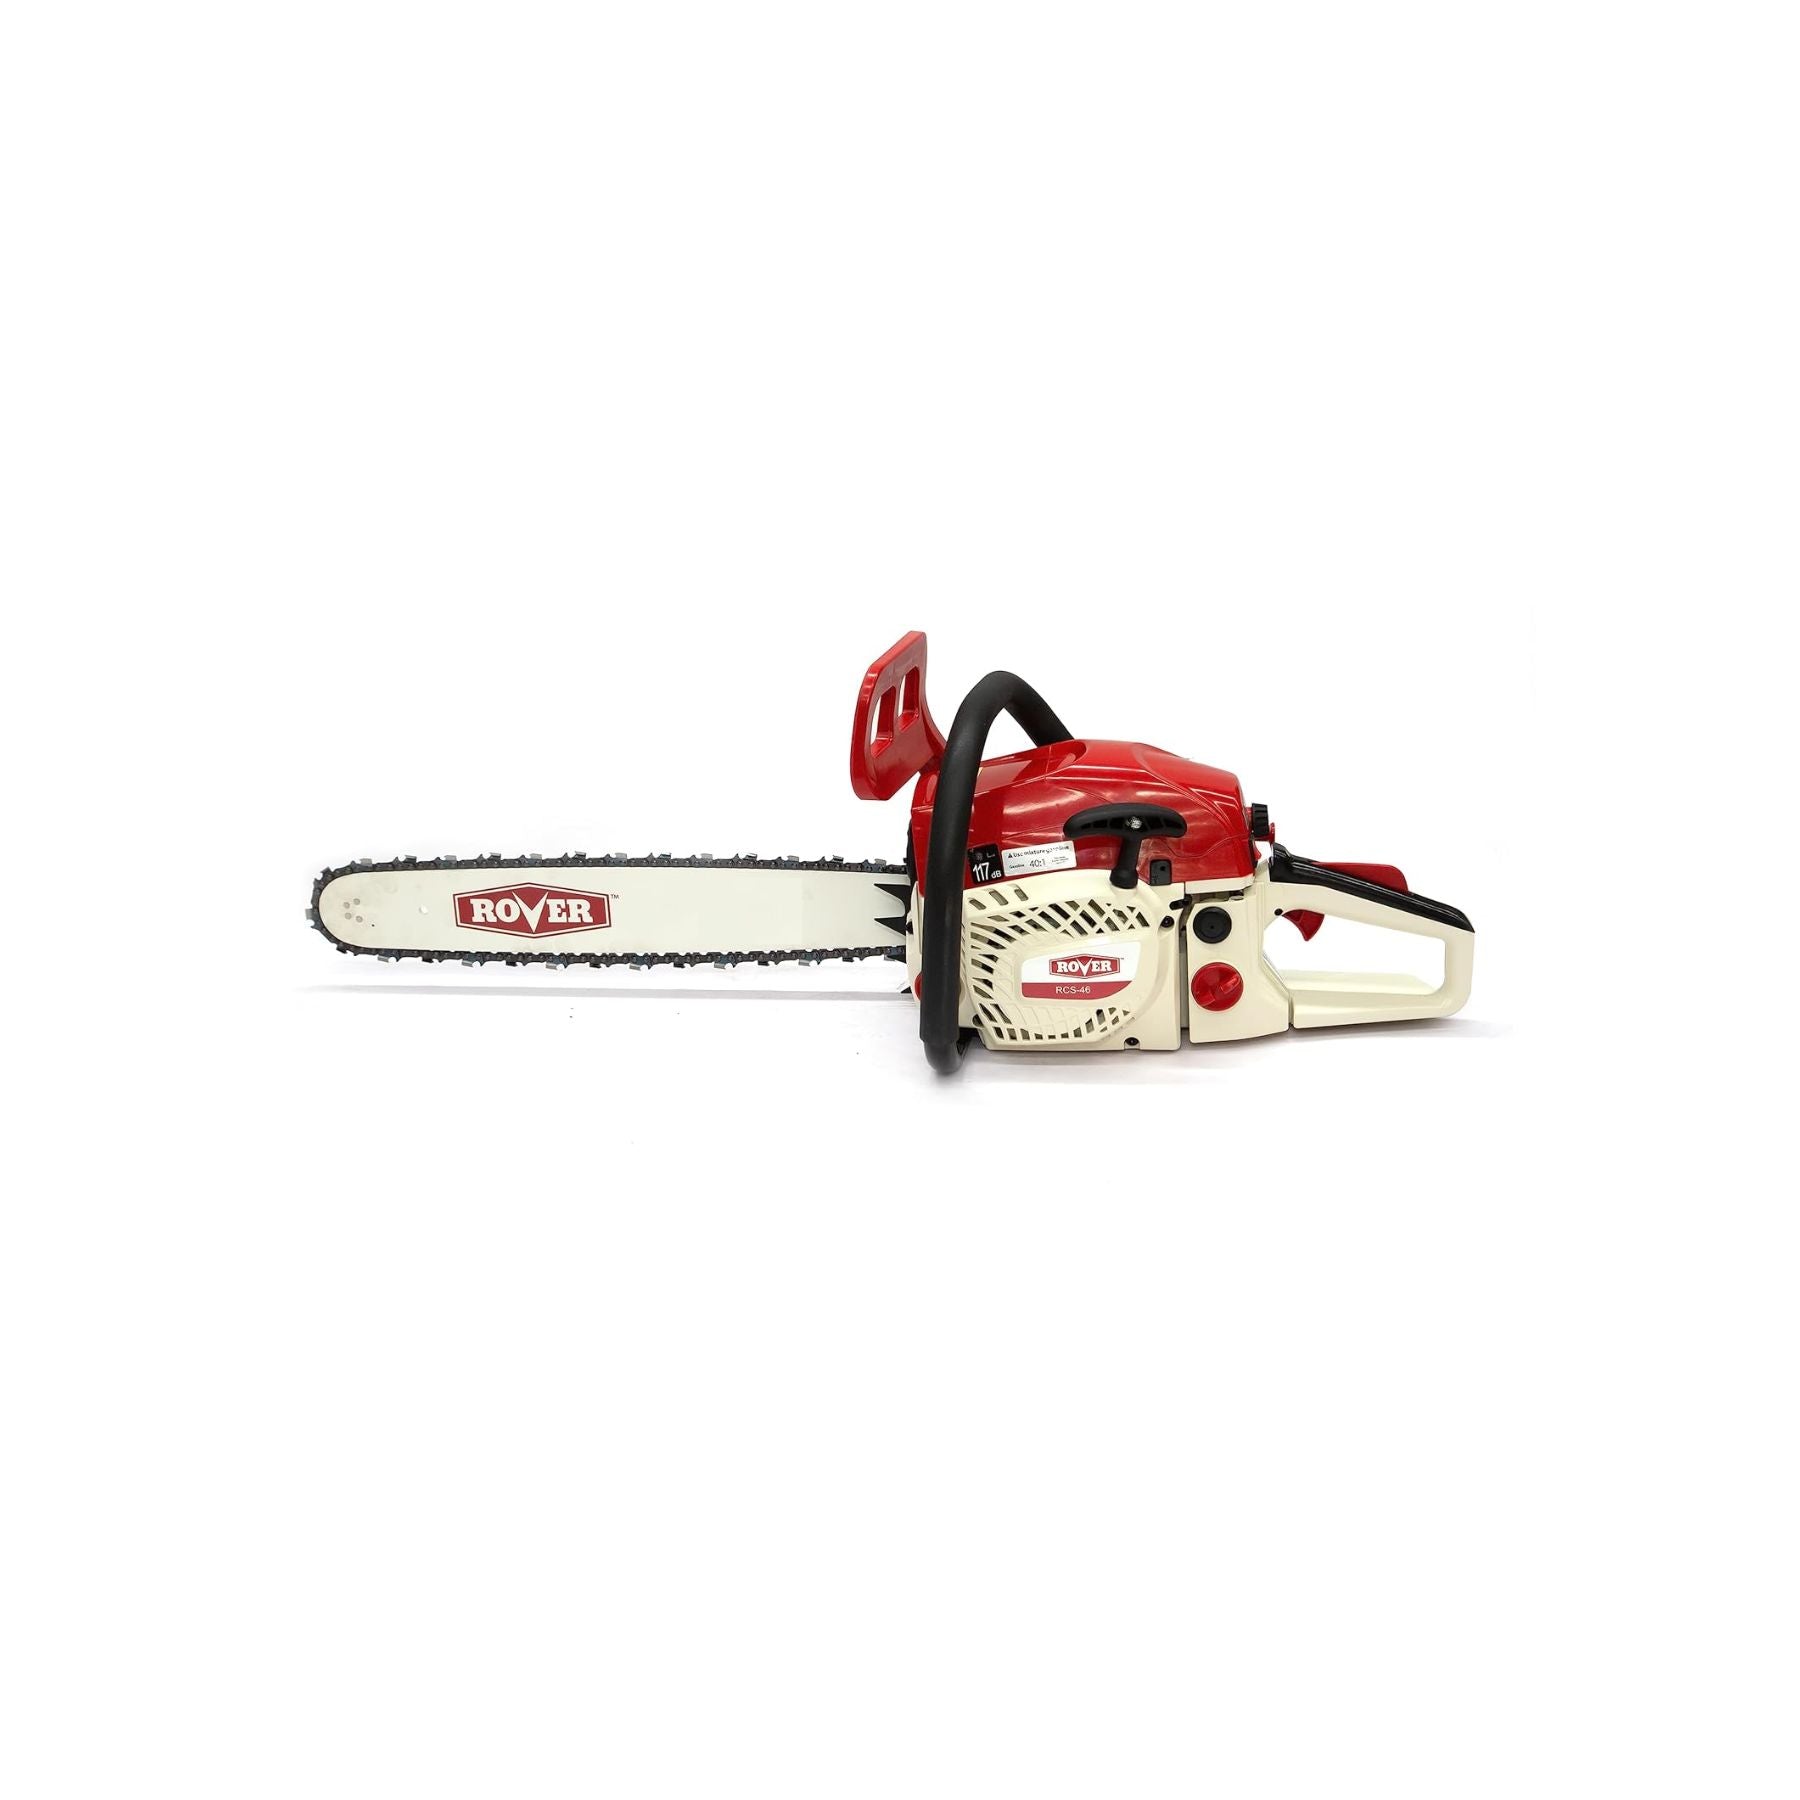 Rover (RCS 55) 22 inch Gasoline Chain Saw